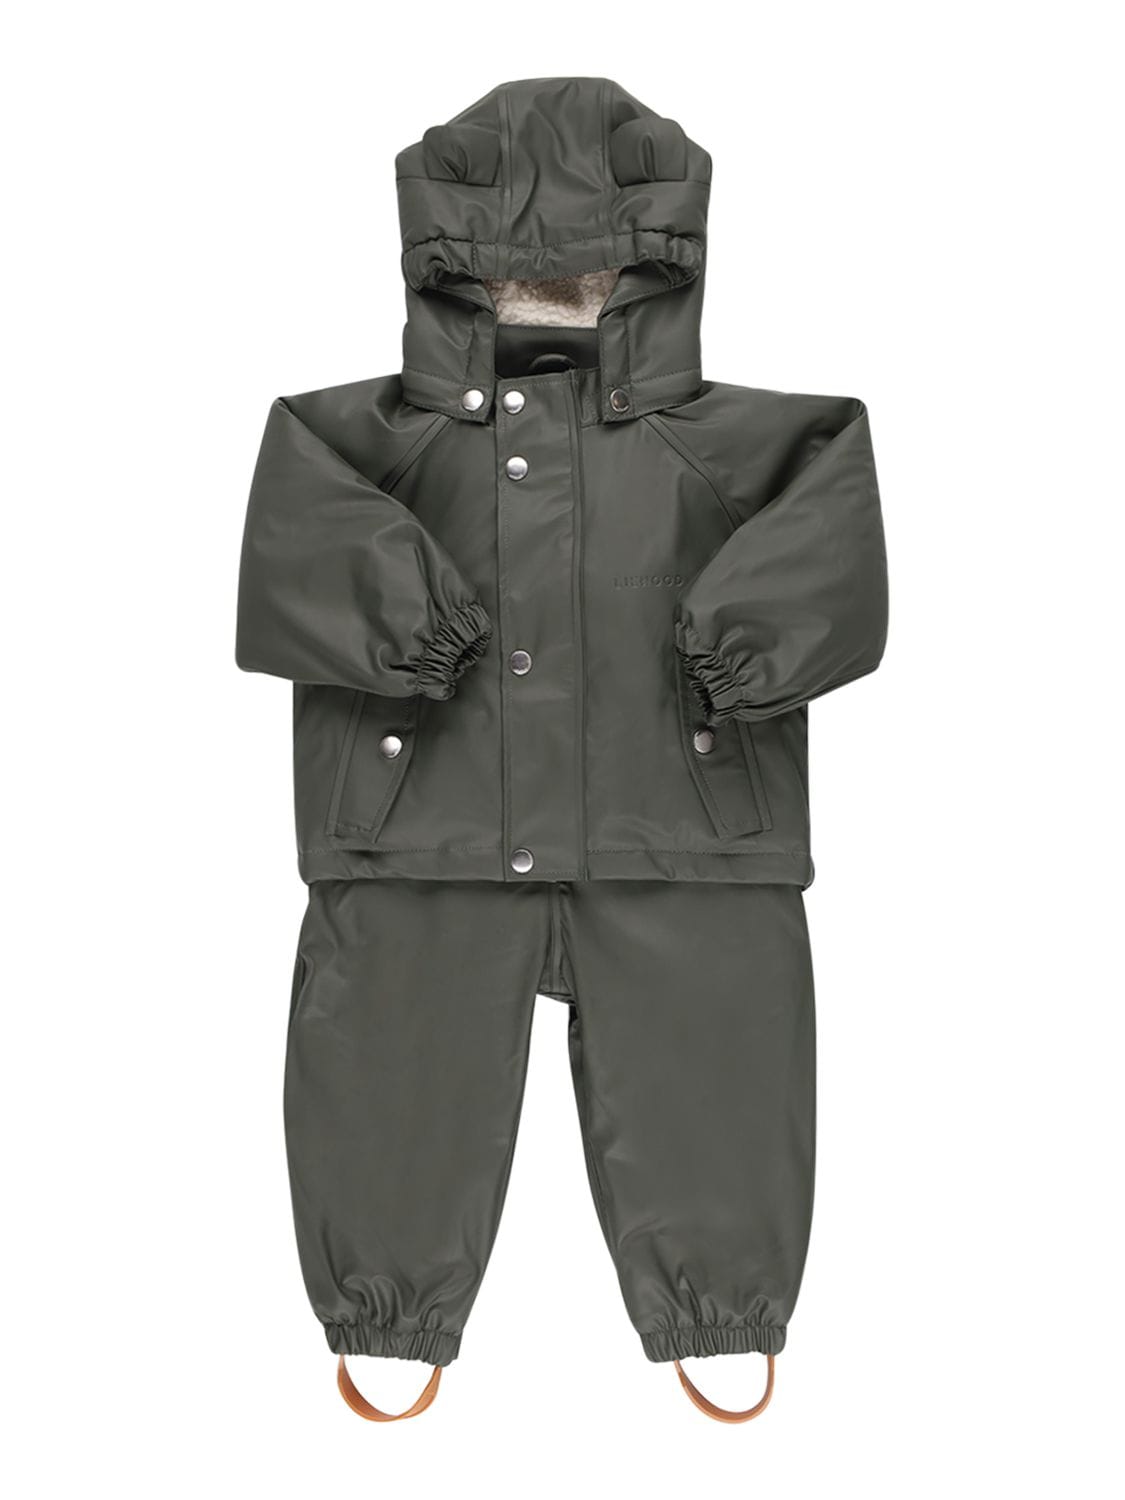 Liewood Kids' Soft Recycled Raincoat & Pants In Military Green